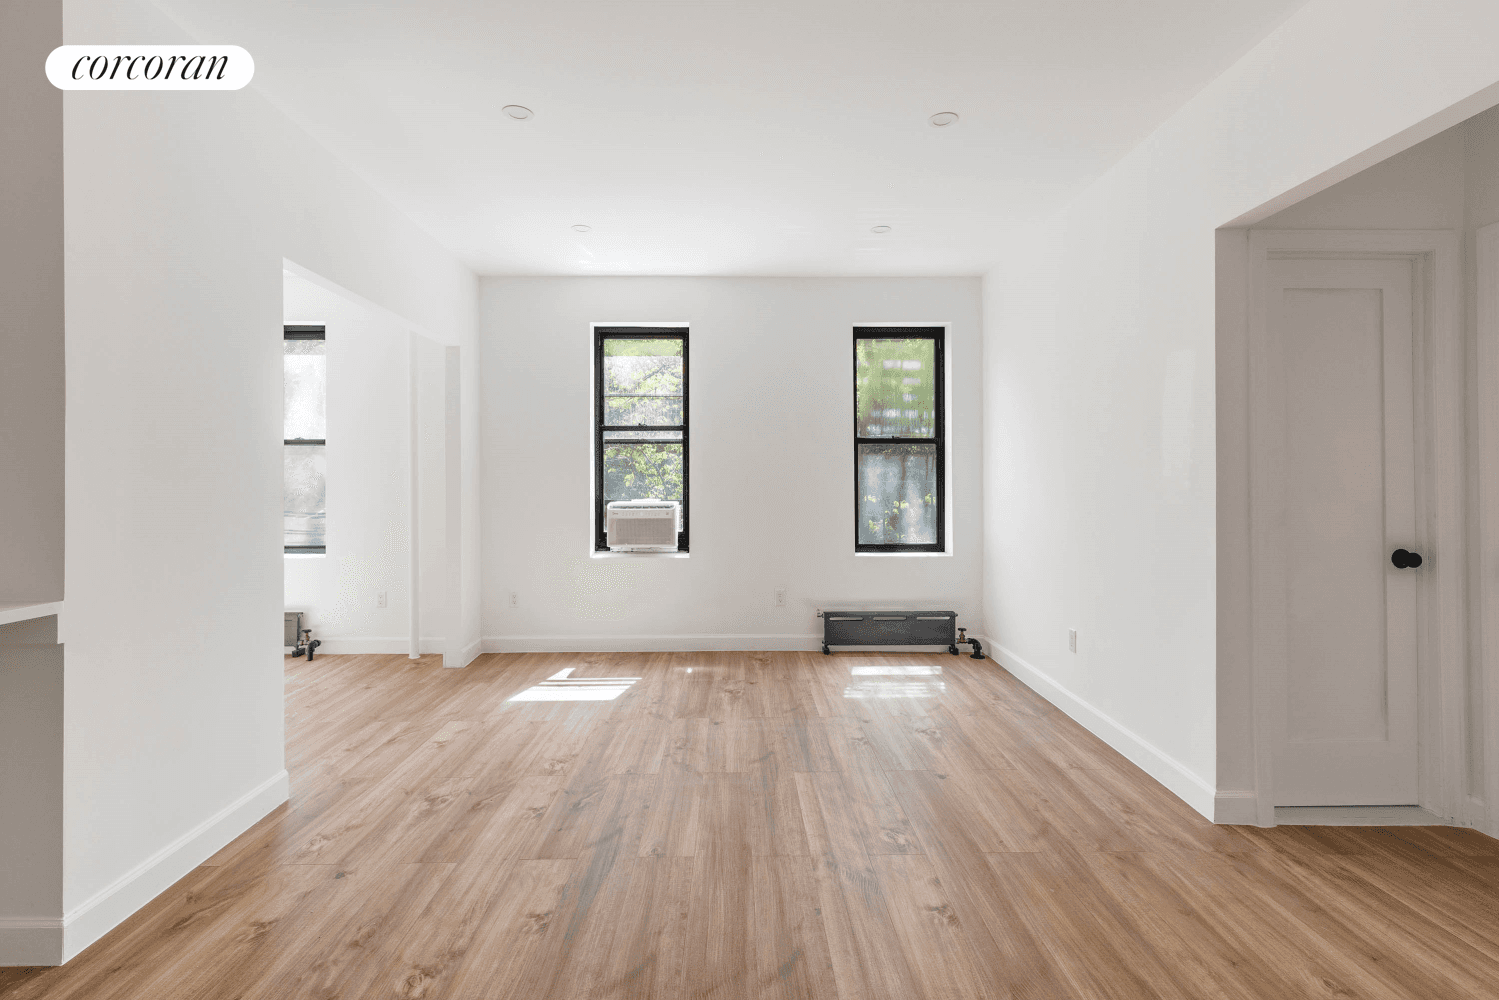 Welcome to C2, a fully renovated and smart ready 1 bedroom condo in Park Slope.